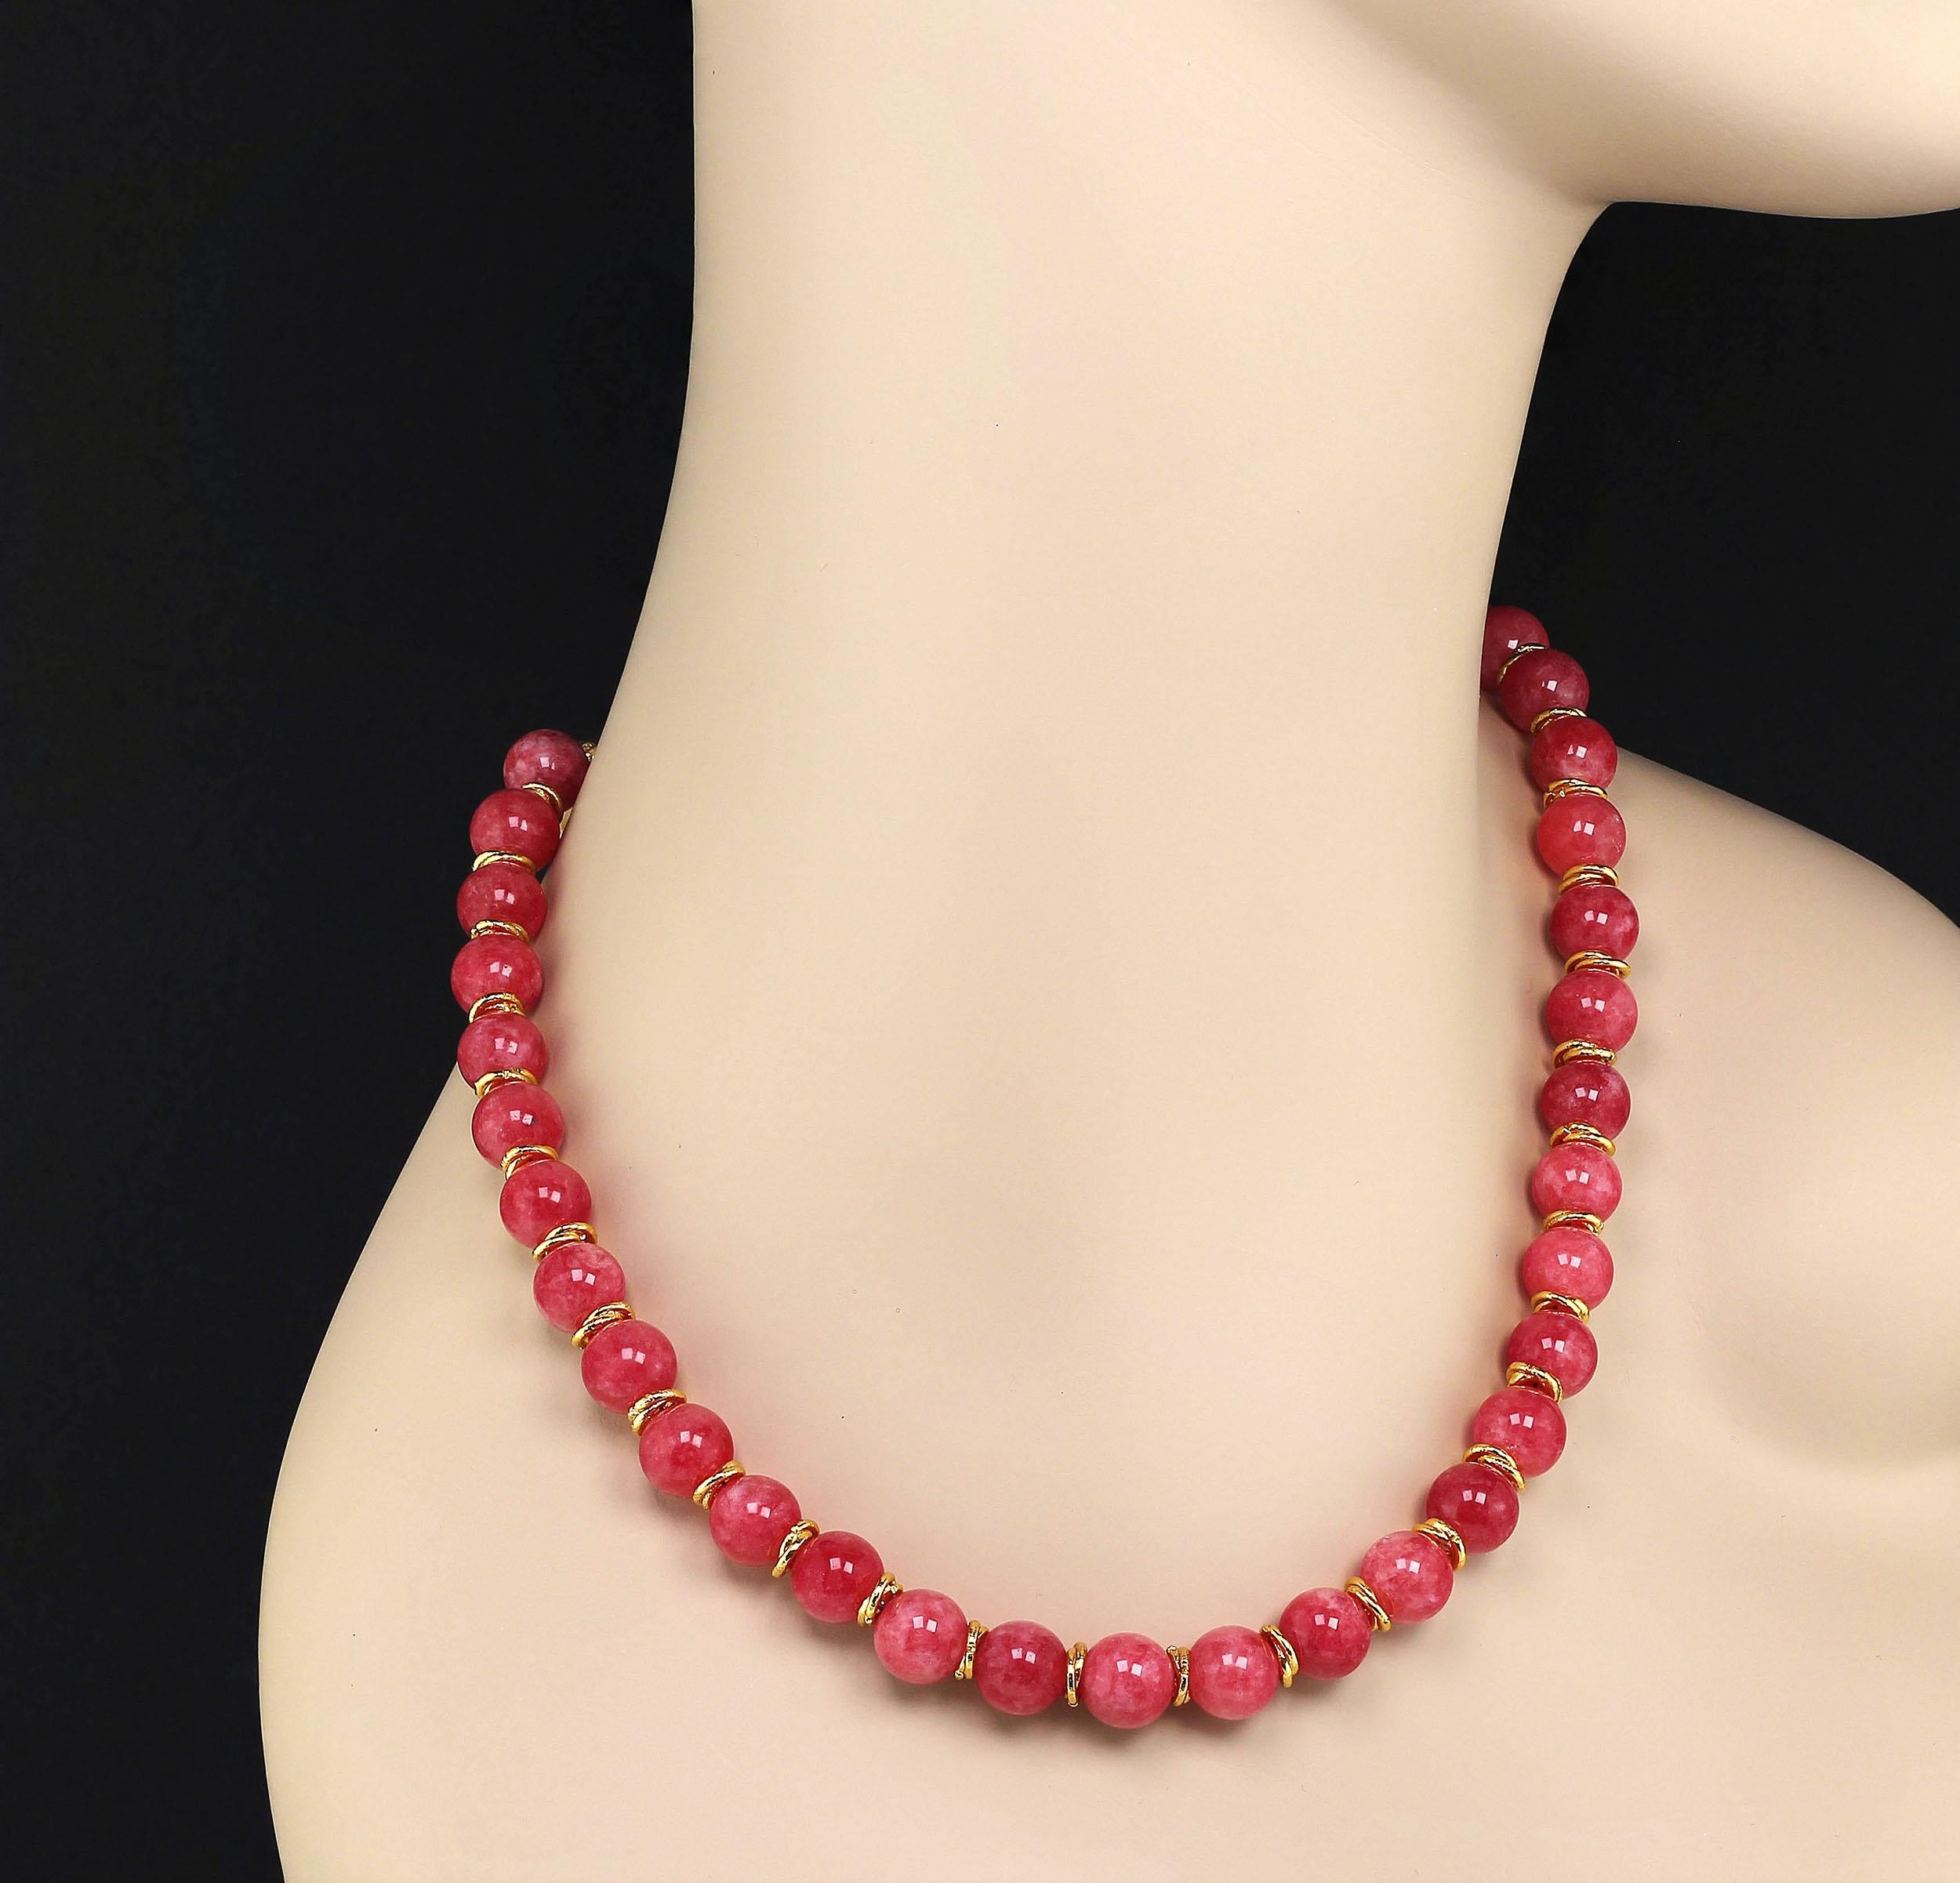 Custom made 20 inch Rhodochrosite tone necklace with goldy accents. This lovely peachy-pinky necklace is perfect to accent your Summer ensembles. The goldy accents are double rings secured off center. This original  necklace is secured with a pewter